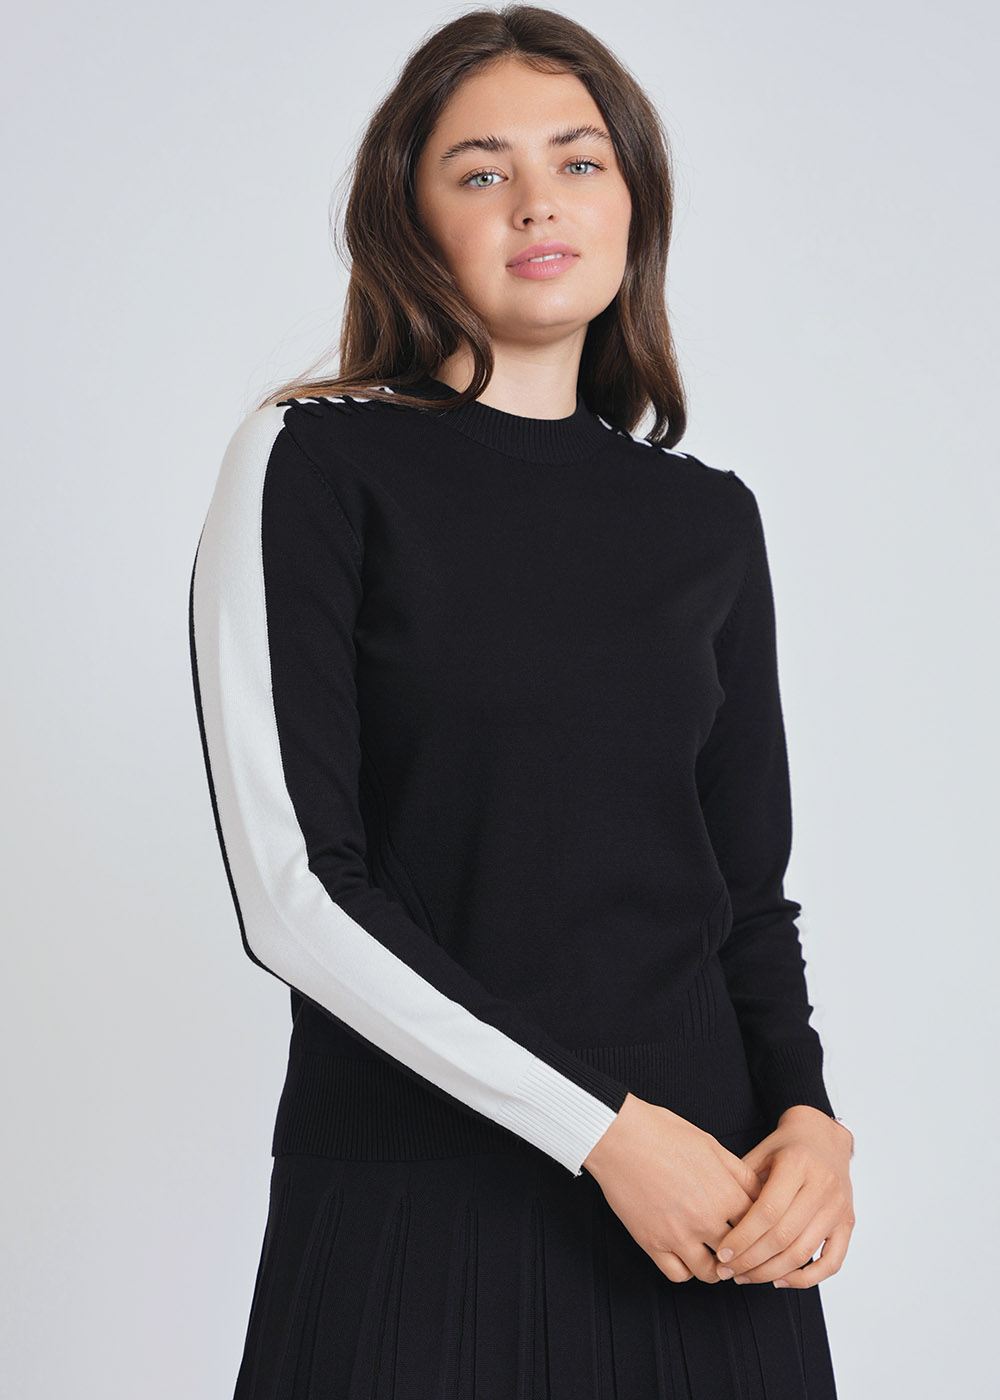 Distinctive Black Knit with Eye-Catching White Sleeve Bands